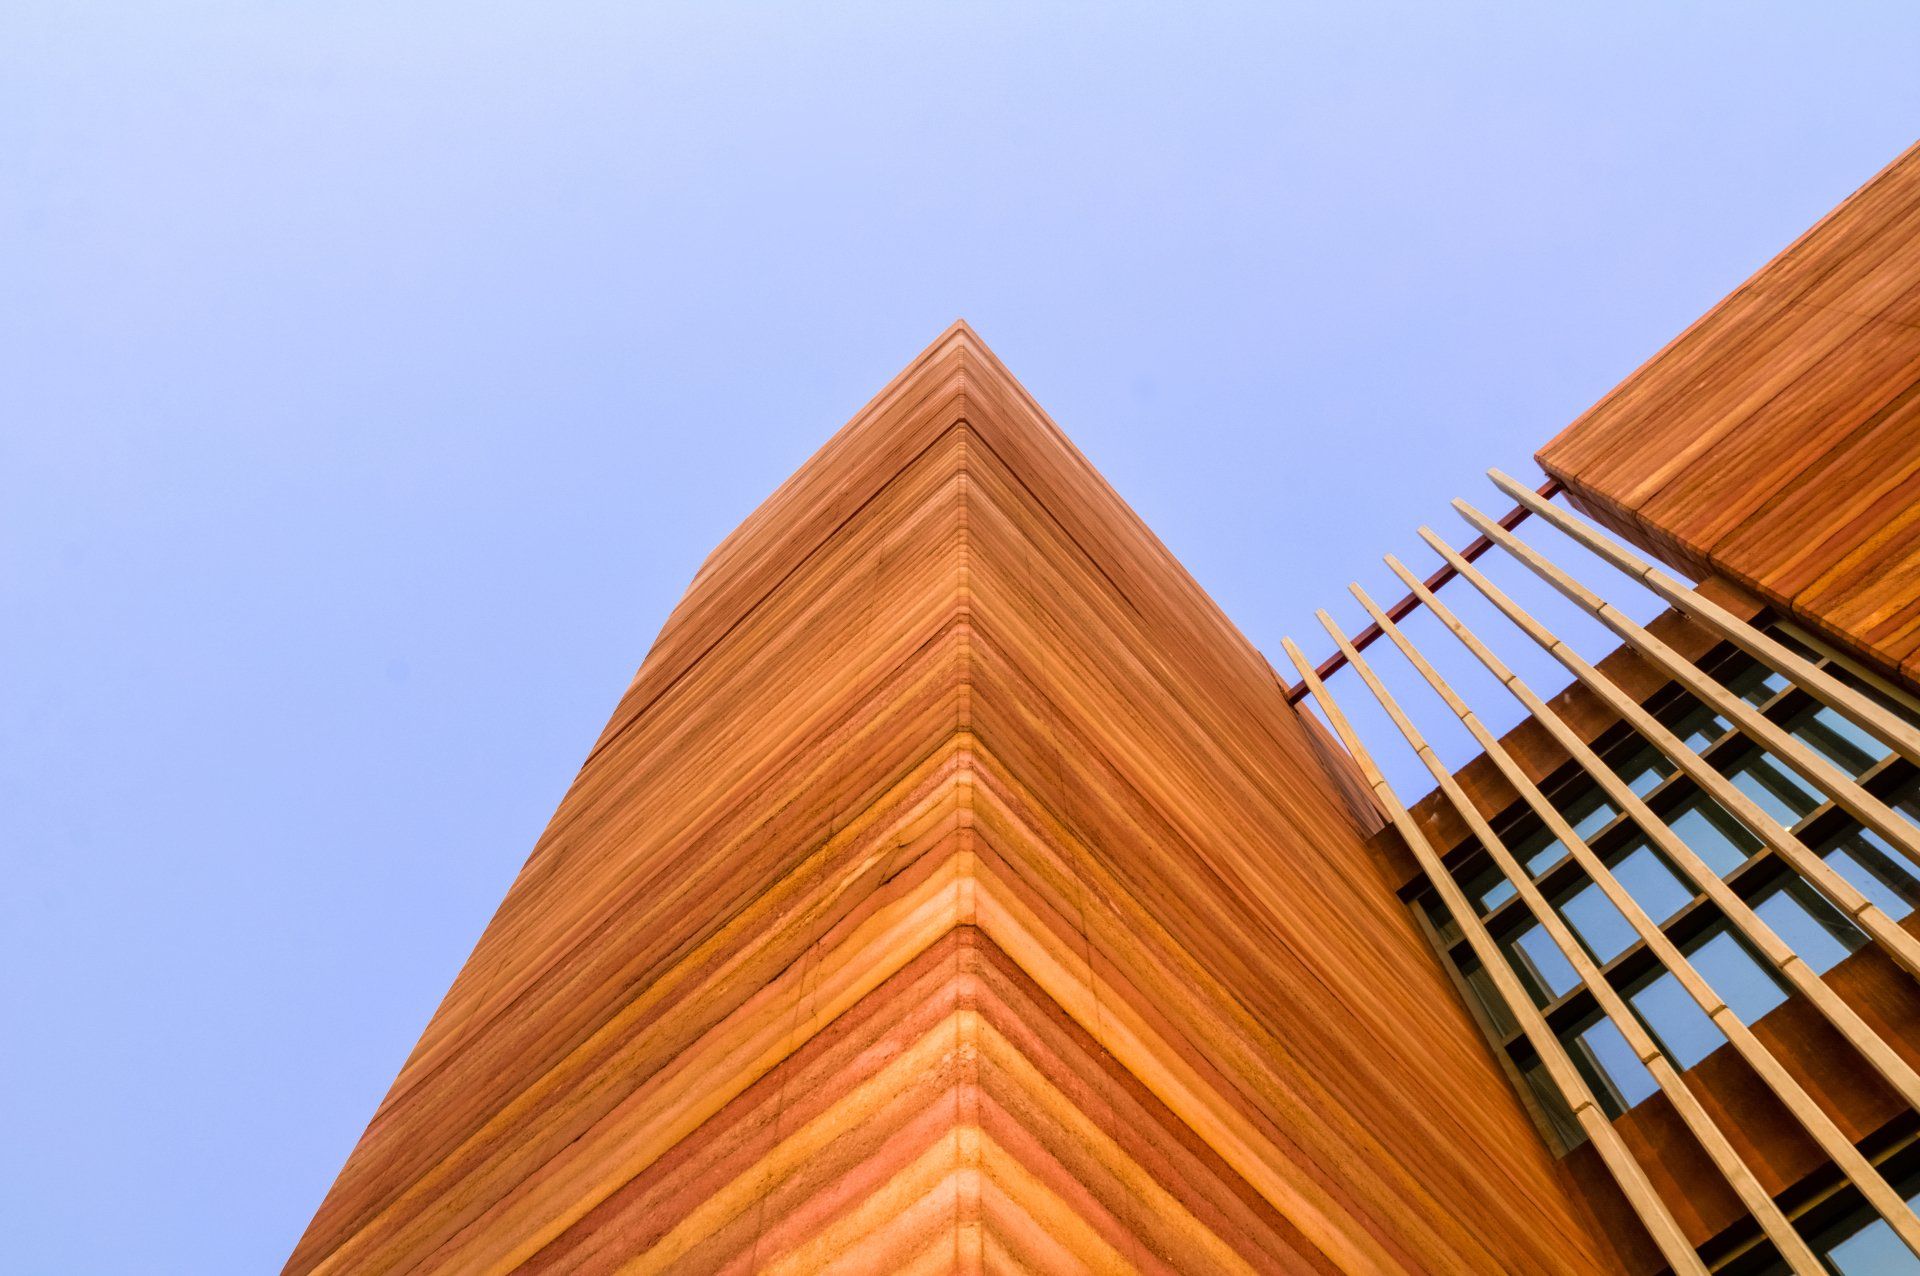 looking up at the tallest rammed earth tower in the world